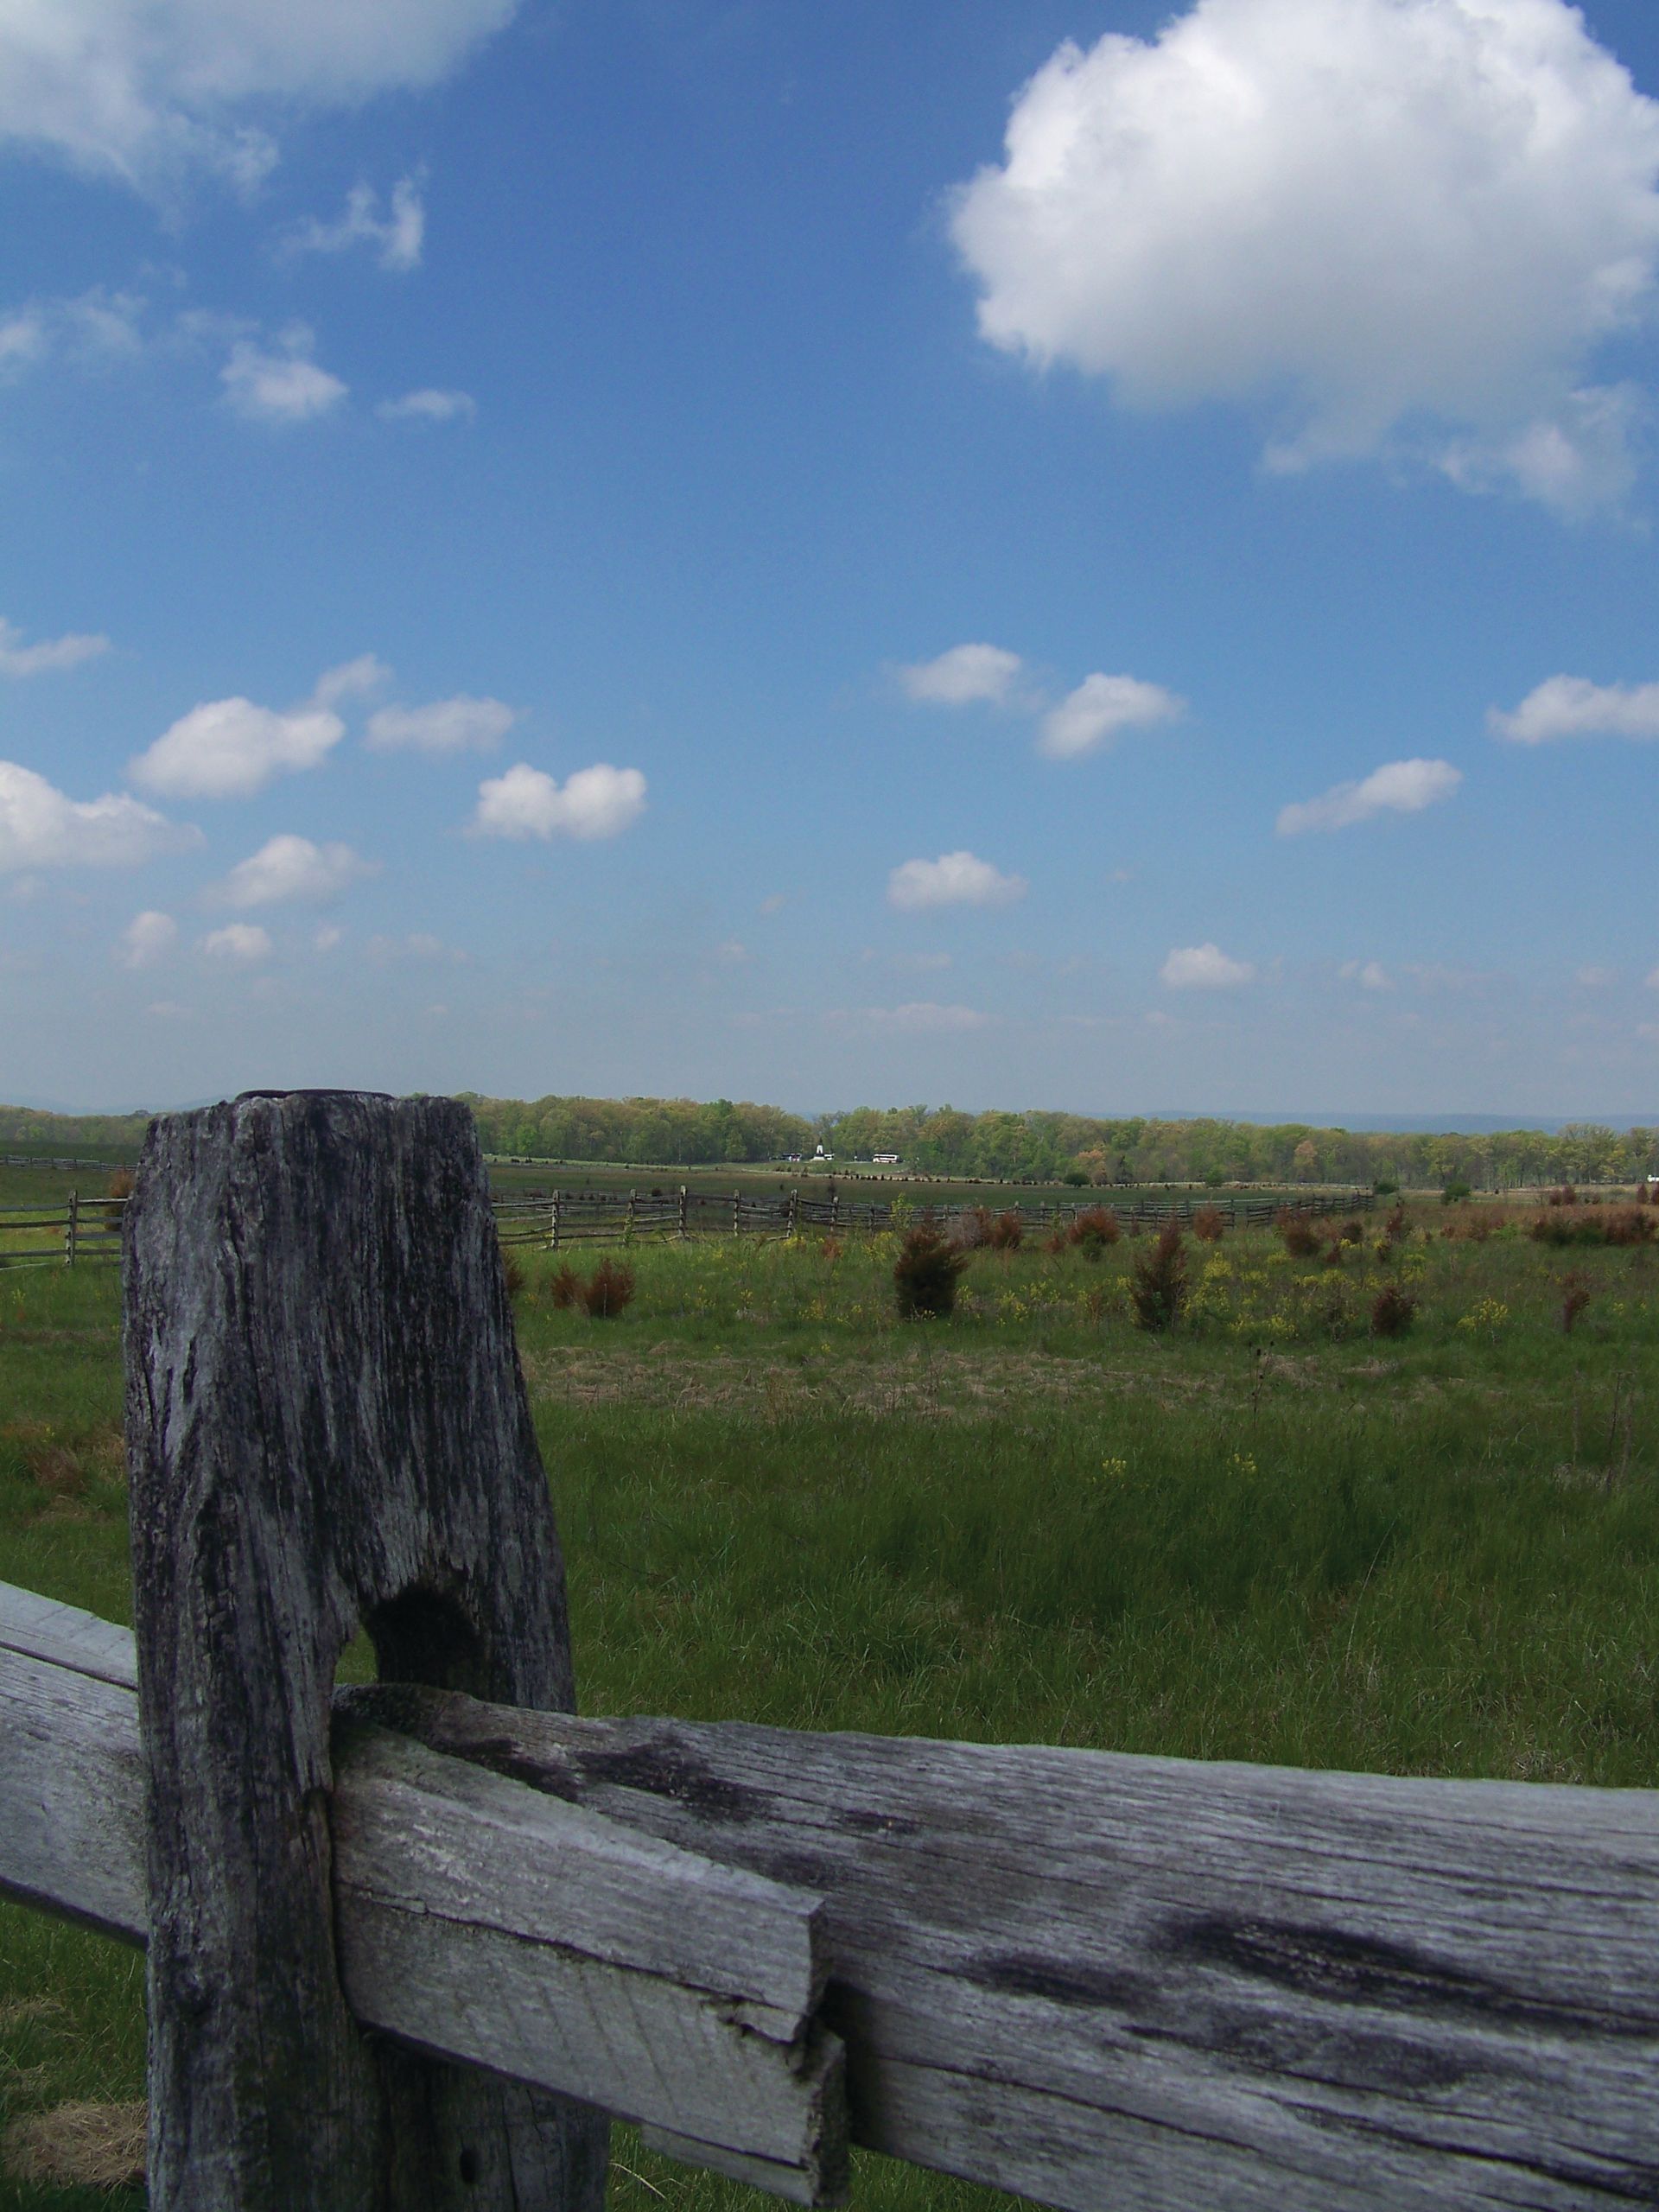 The Pickett's Charge field today (Author photo)